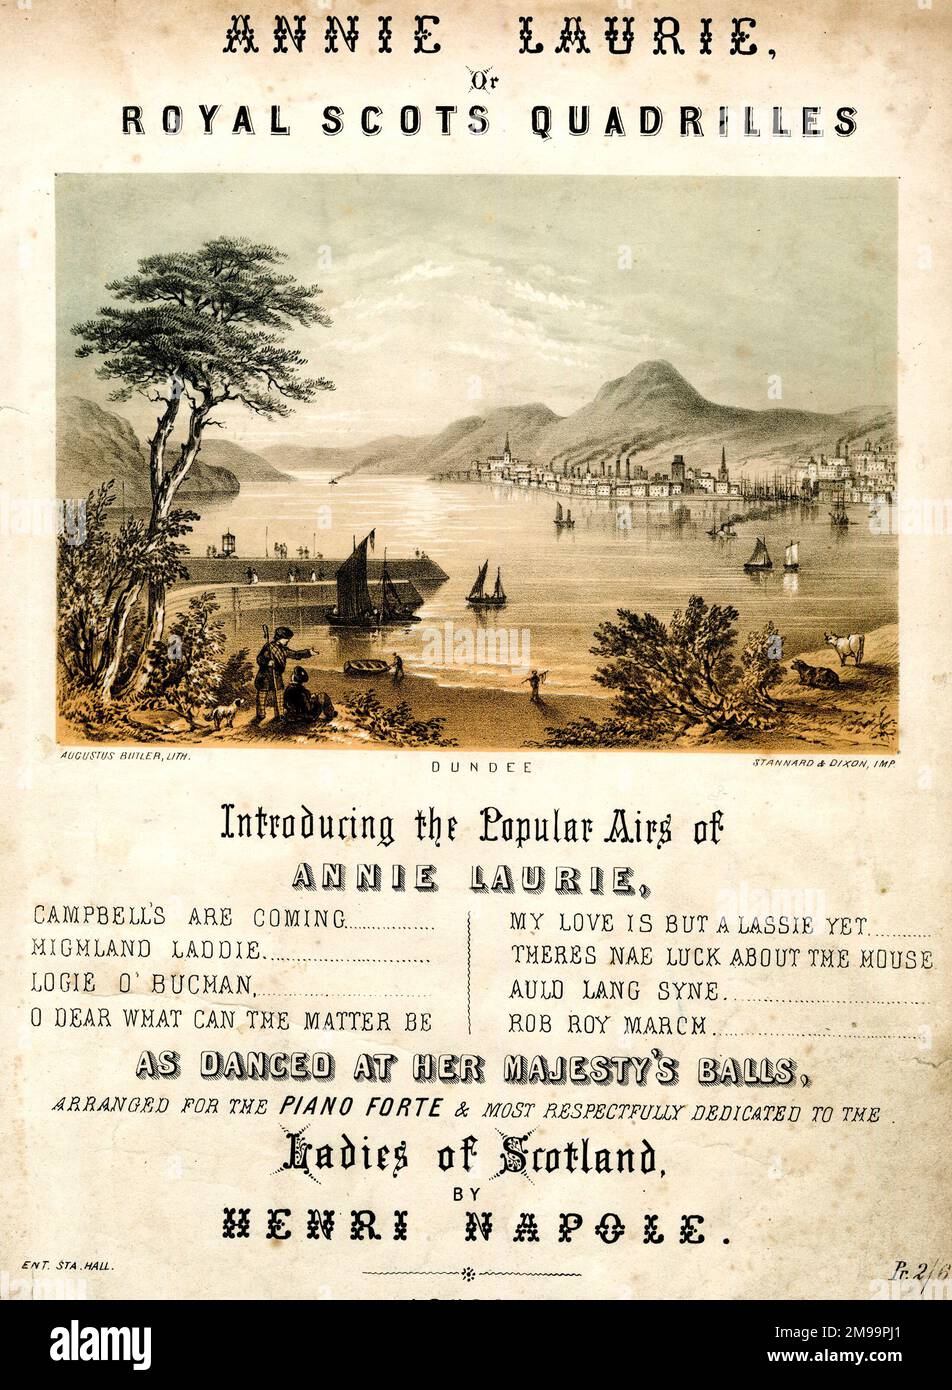 Music cover, Annie Laurie or Royal Scots Quadrilles, with a view of Dundee, Scotland. Introducing the Popular Airs of Annie Laurie (Campbells Are Coming, Highland Laddie, Logie O'Buchan, O Dear What Can The Matter Be, My Love is But a Lassie Yet, There's Nae Luck About the House, Auld Lang Syne, Rob Roy March) as danced at Her Majesty's Balls. Arranged for piano and dedicated to the Ladies of Scotland by Henri Napole. Stock Photo